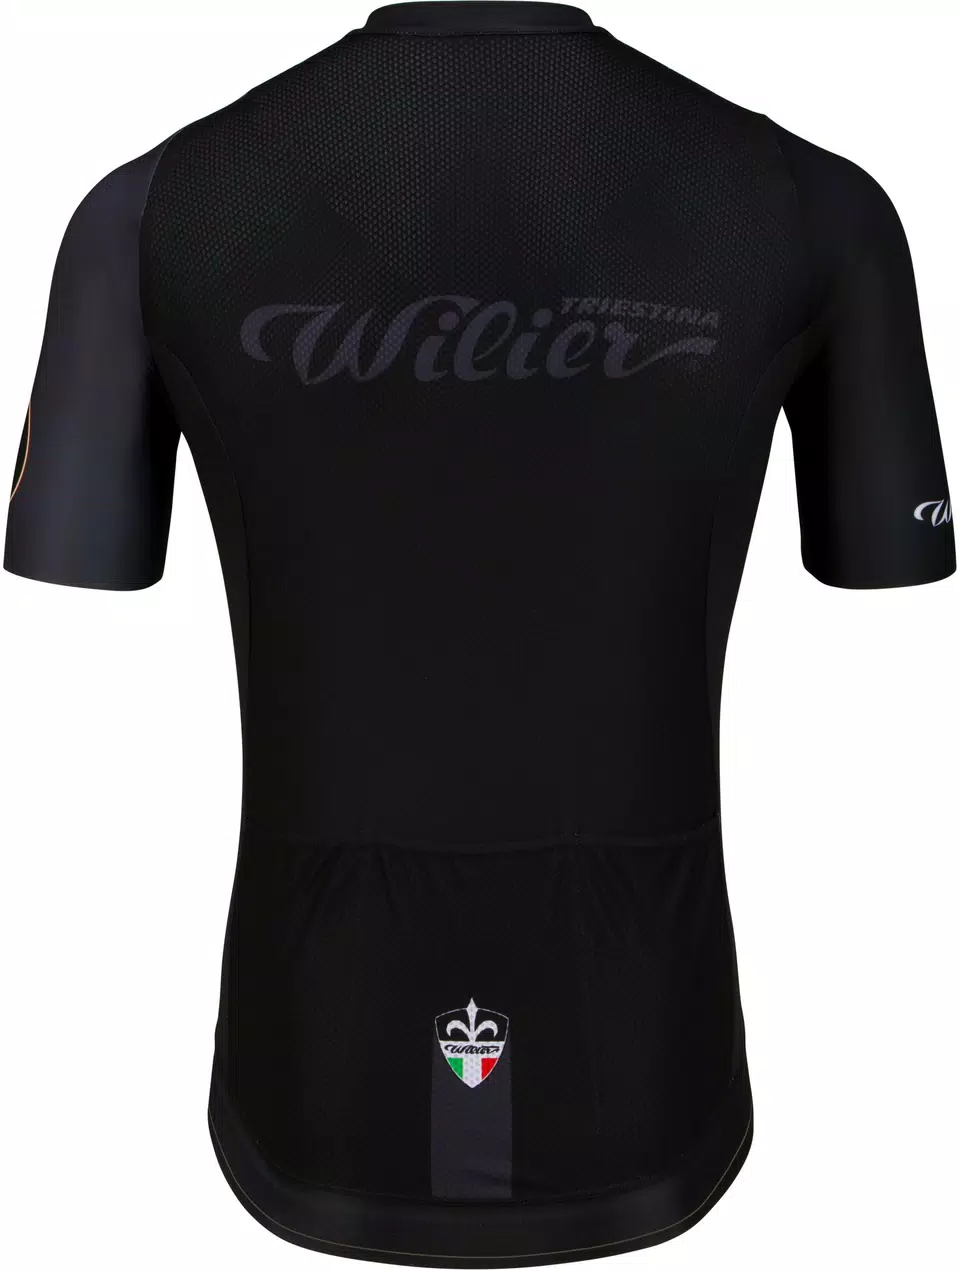 Wilier Cycling Club jersey black man